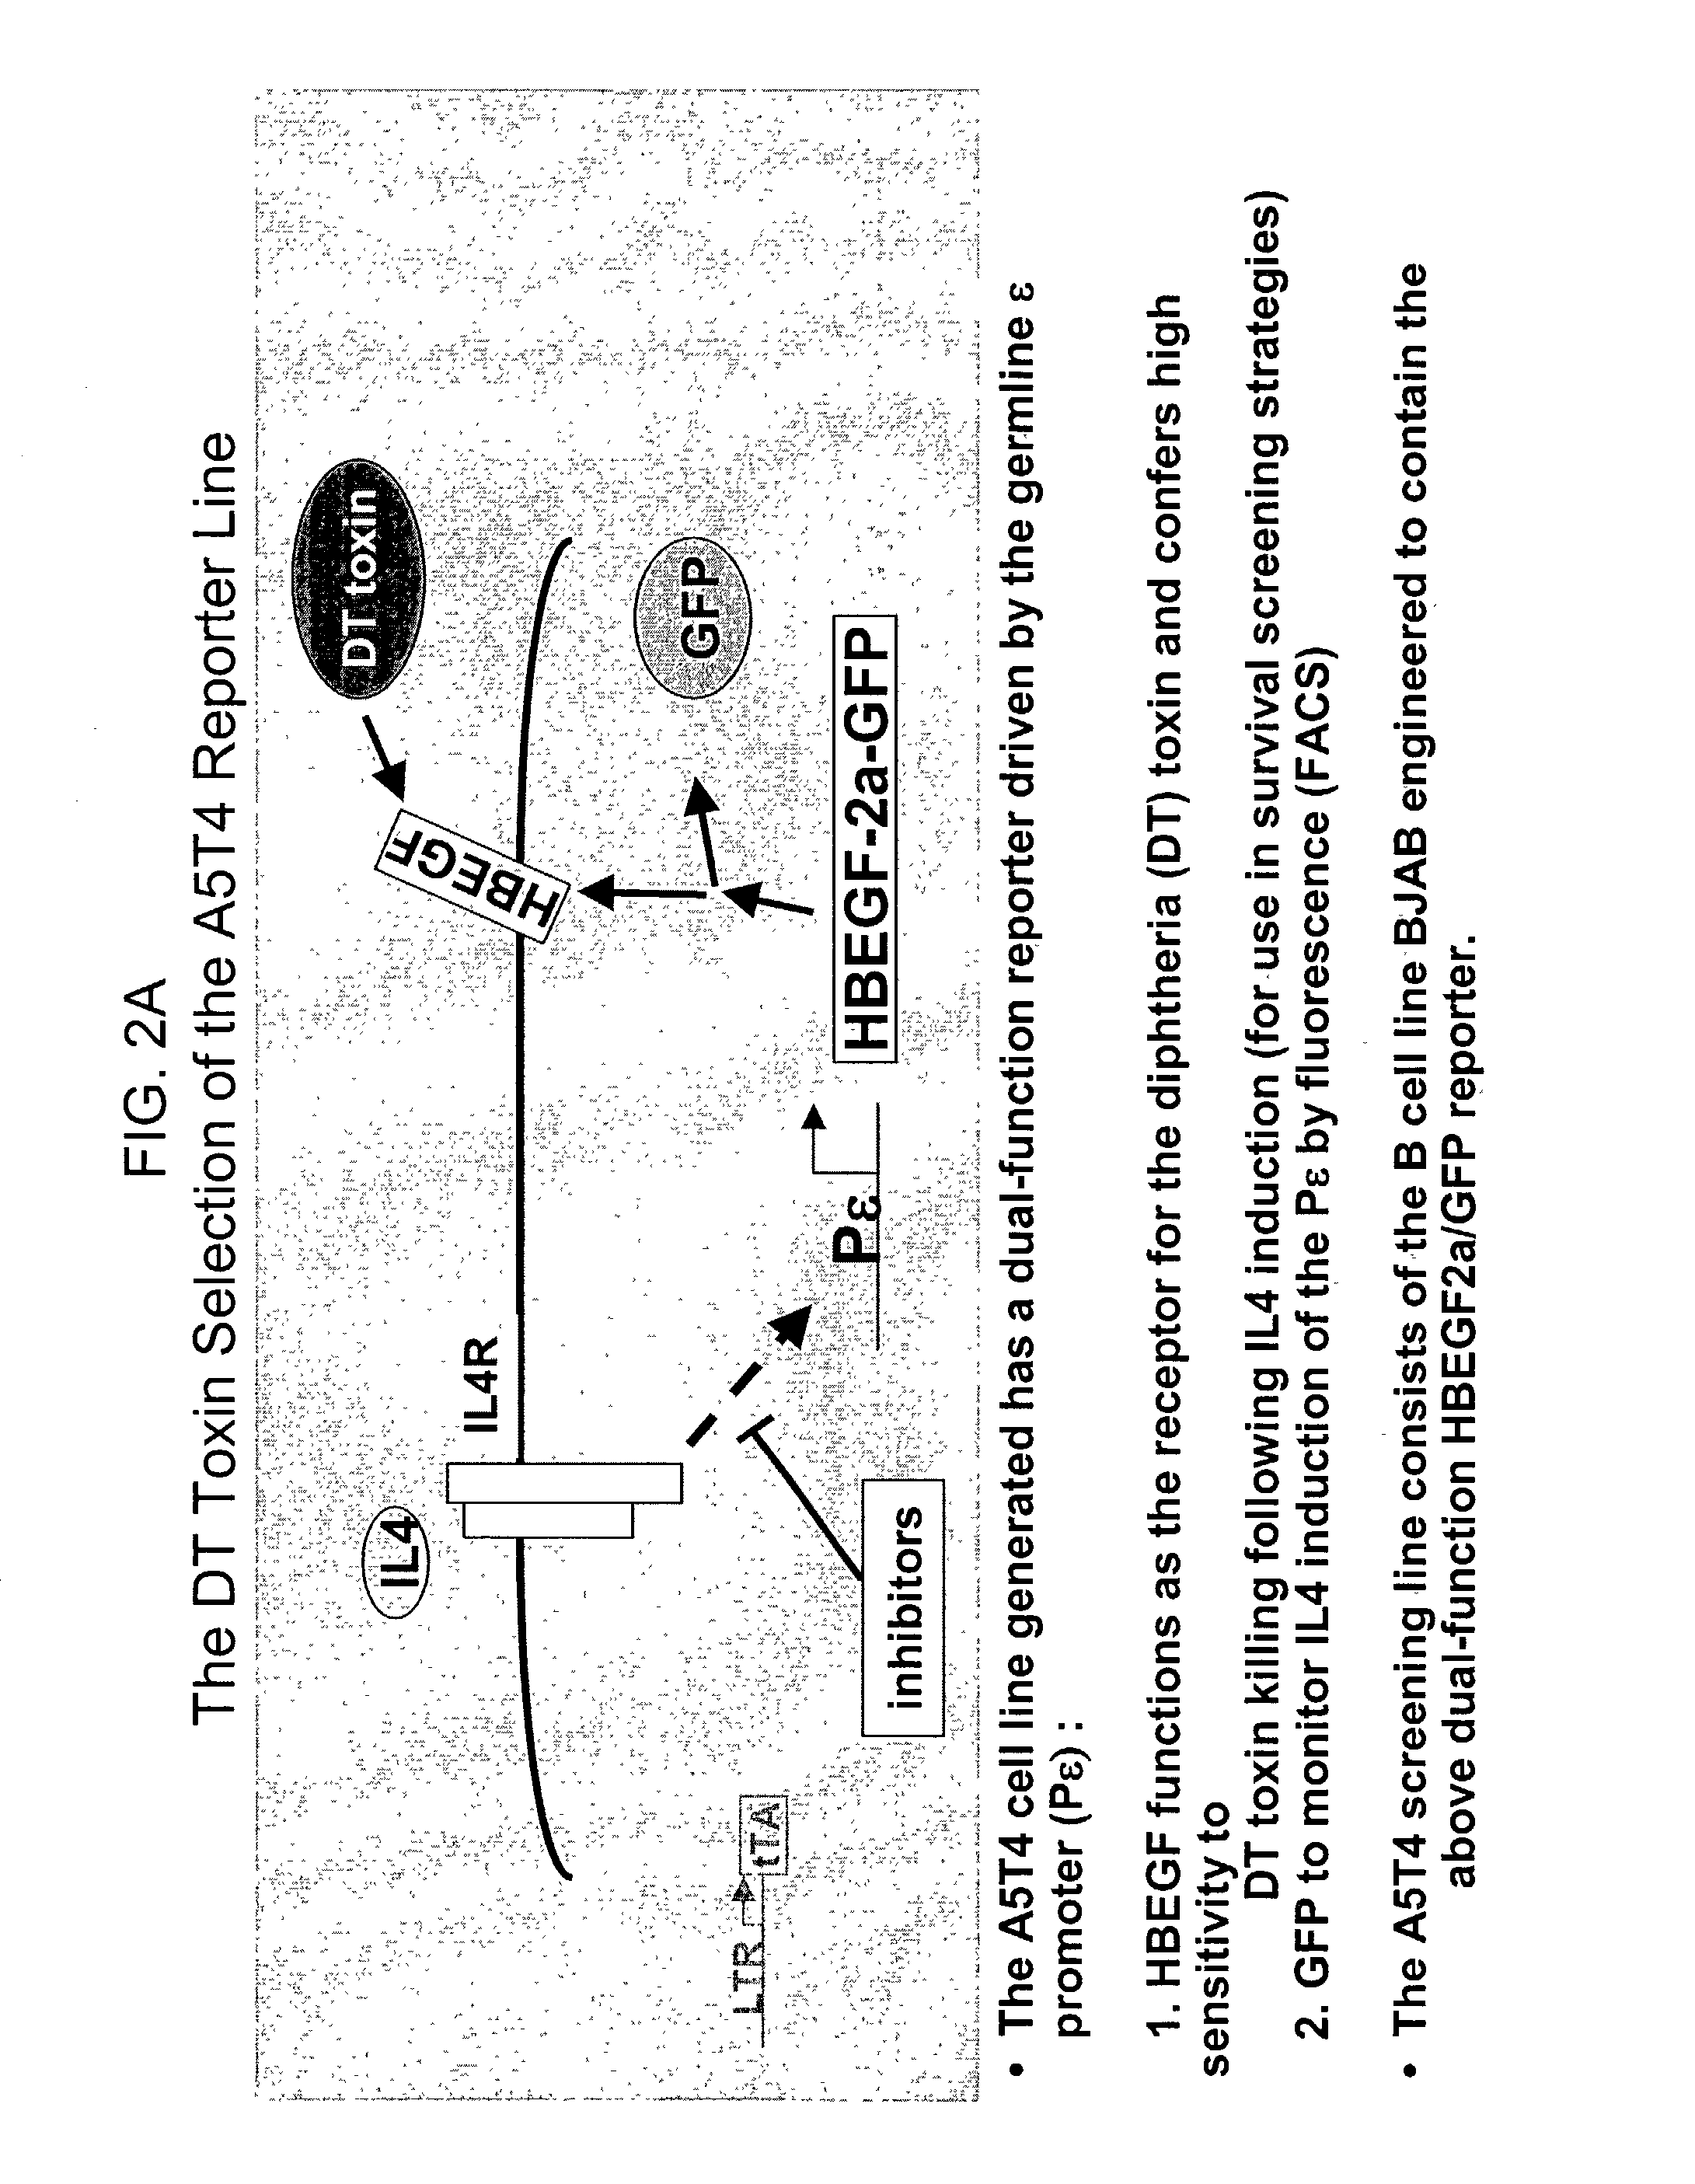 Methods of identifying compounds that modulate IL-4 receptor-mediated IgE synthesis utilizing an adenosine kinase